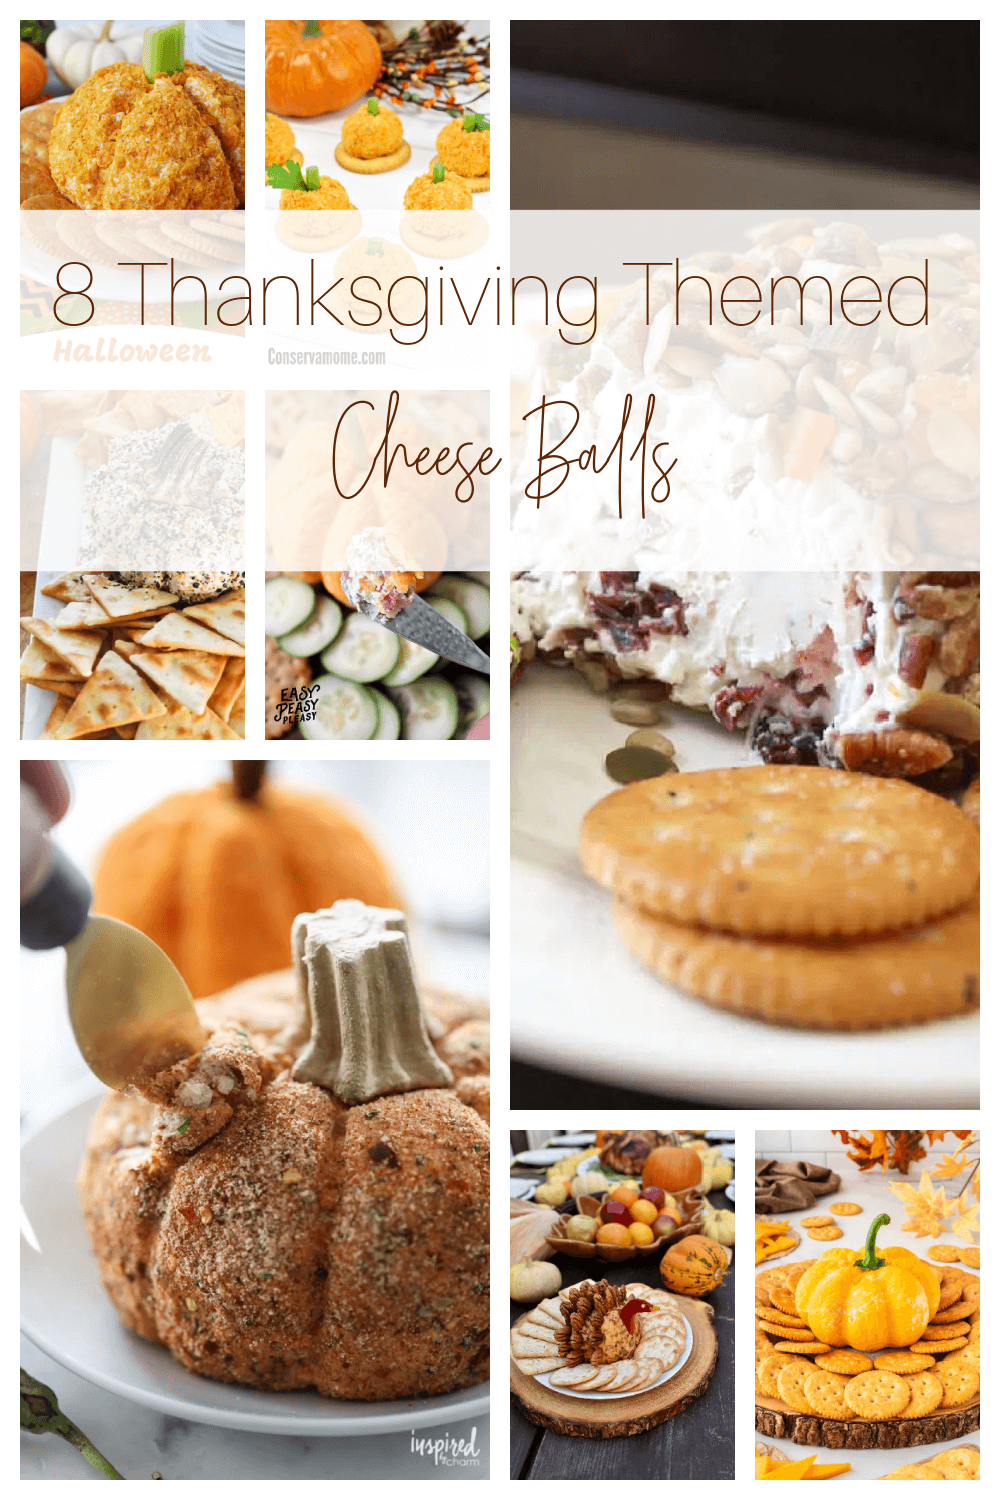 8 Thanksgiving Themed Cheese Ball Recipes